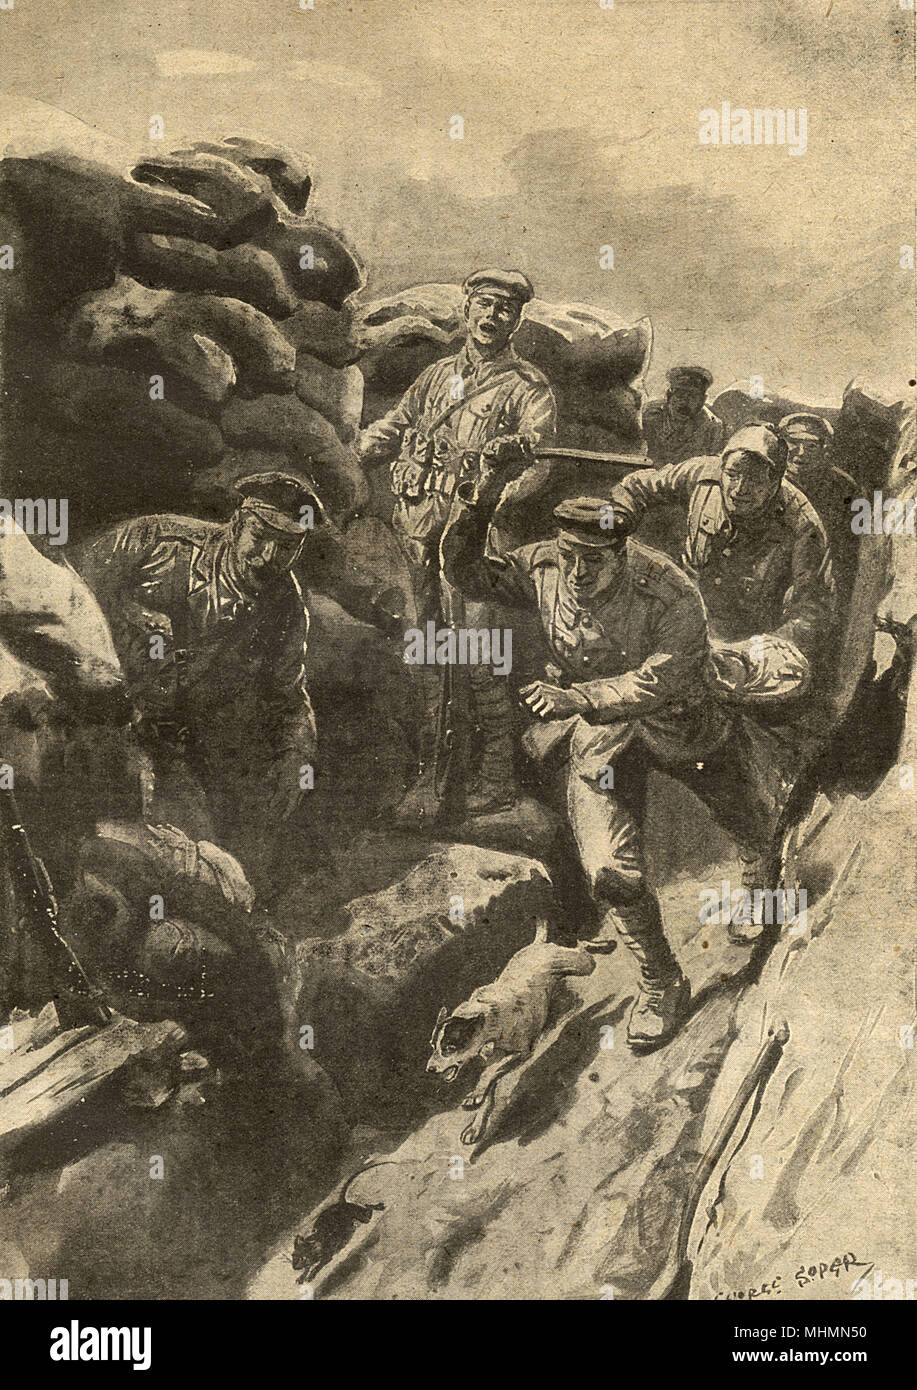 Ratting: The New Sport in the Trenches.  British soldiers follow a terrier as it dashes along a trench on the Western Front in pursuit of a rat.  The War Budget, in which this illustration was published, writes that rewards were offered for the capture of rats and in one single fortnight, one army corps alone disposed of 8000 rats, some indication of the scale of the vermin problem in the trenches.     Date: 1916 Stock Photo